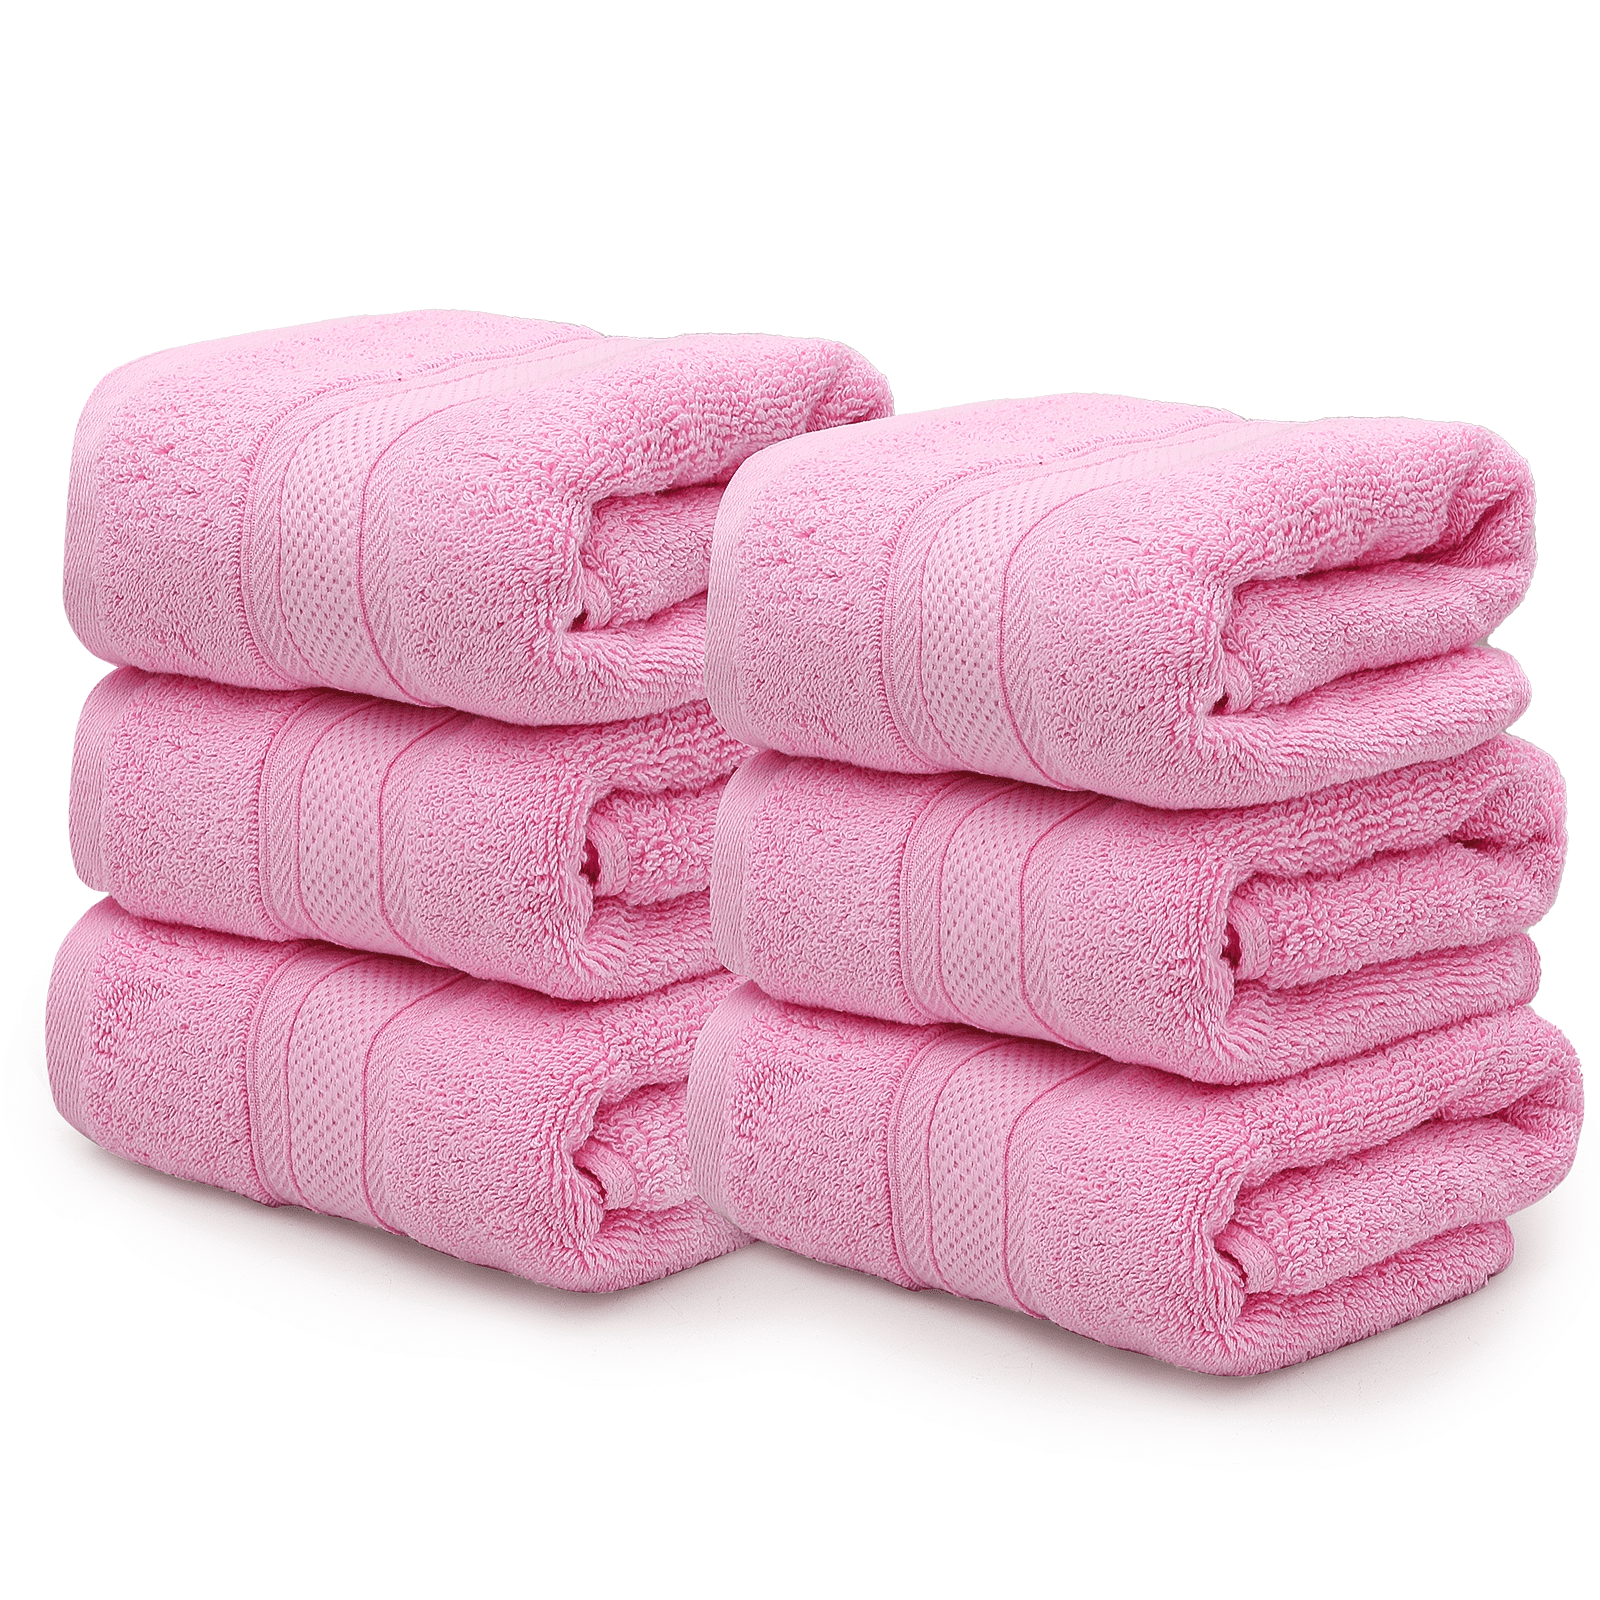 MoNiBloom Ultra Soft Hand Towel Set of 6, Pure Cotton Absorbent Quick Dry  Bathroom Hand Towels for Hotel Spa Gym Shower Beach Kitchen, 16x28 in,  Light